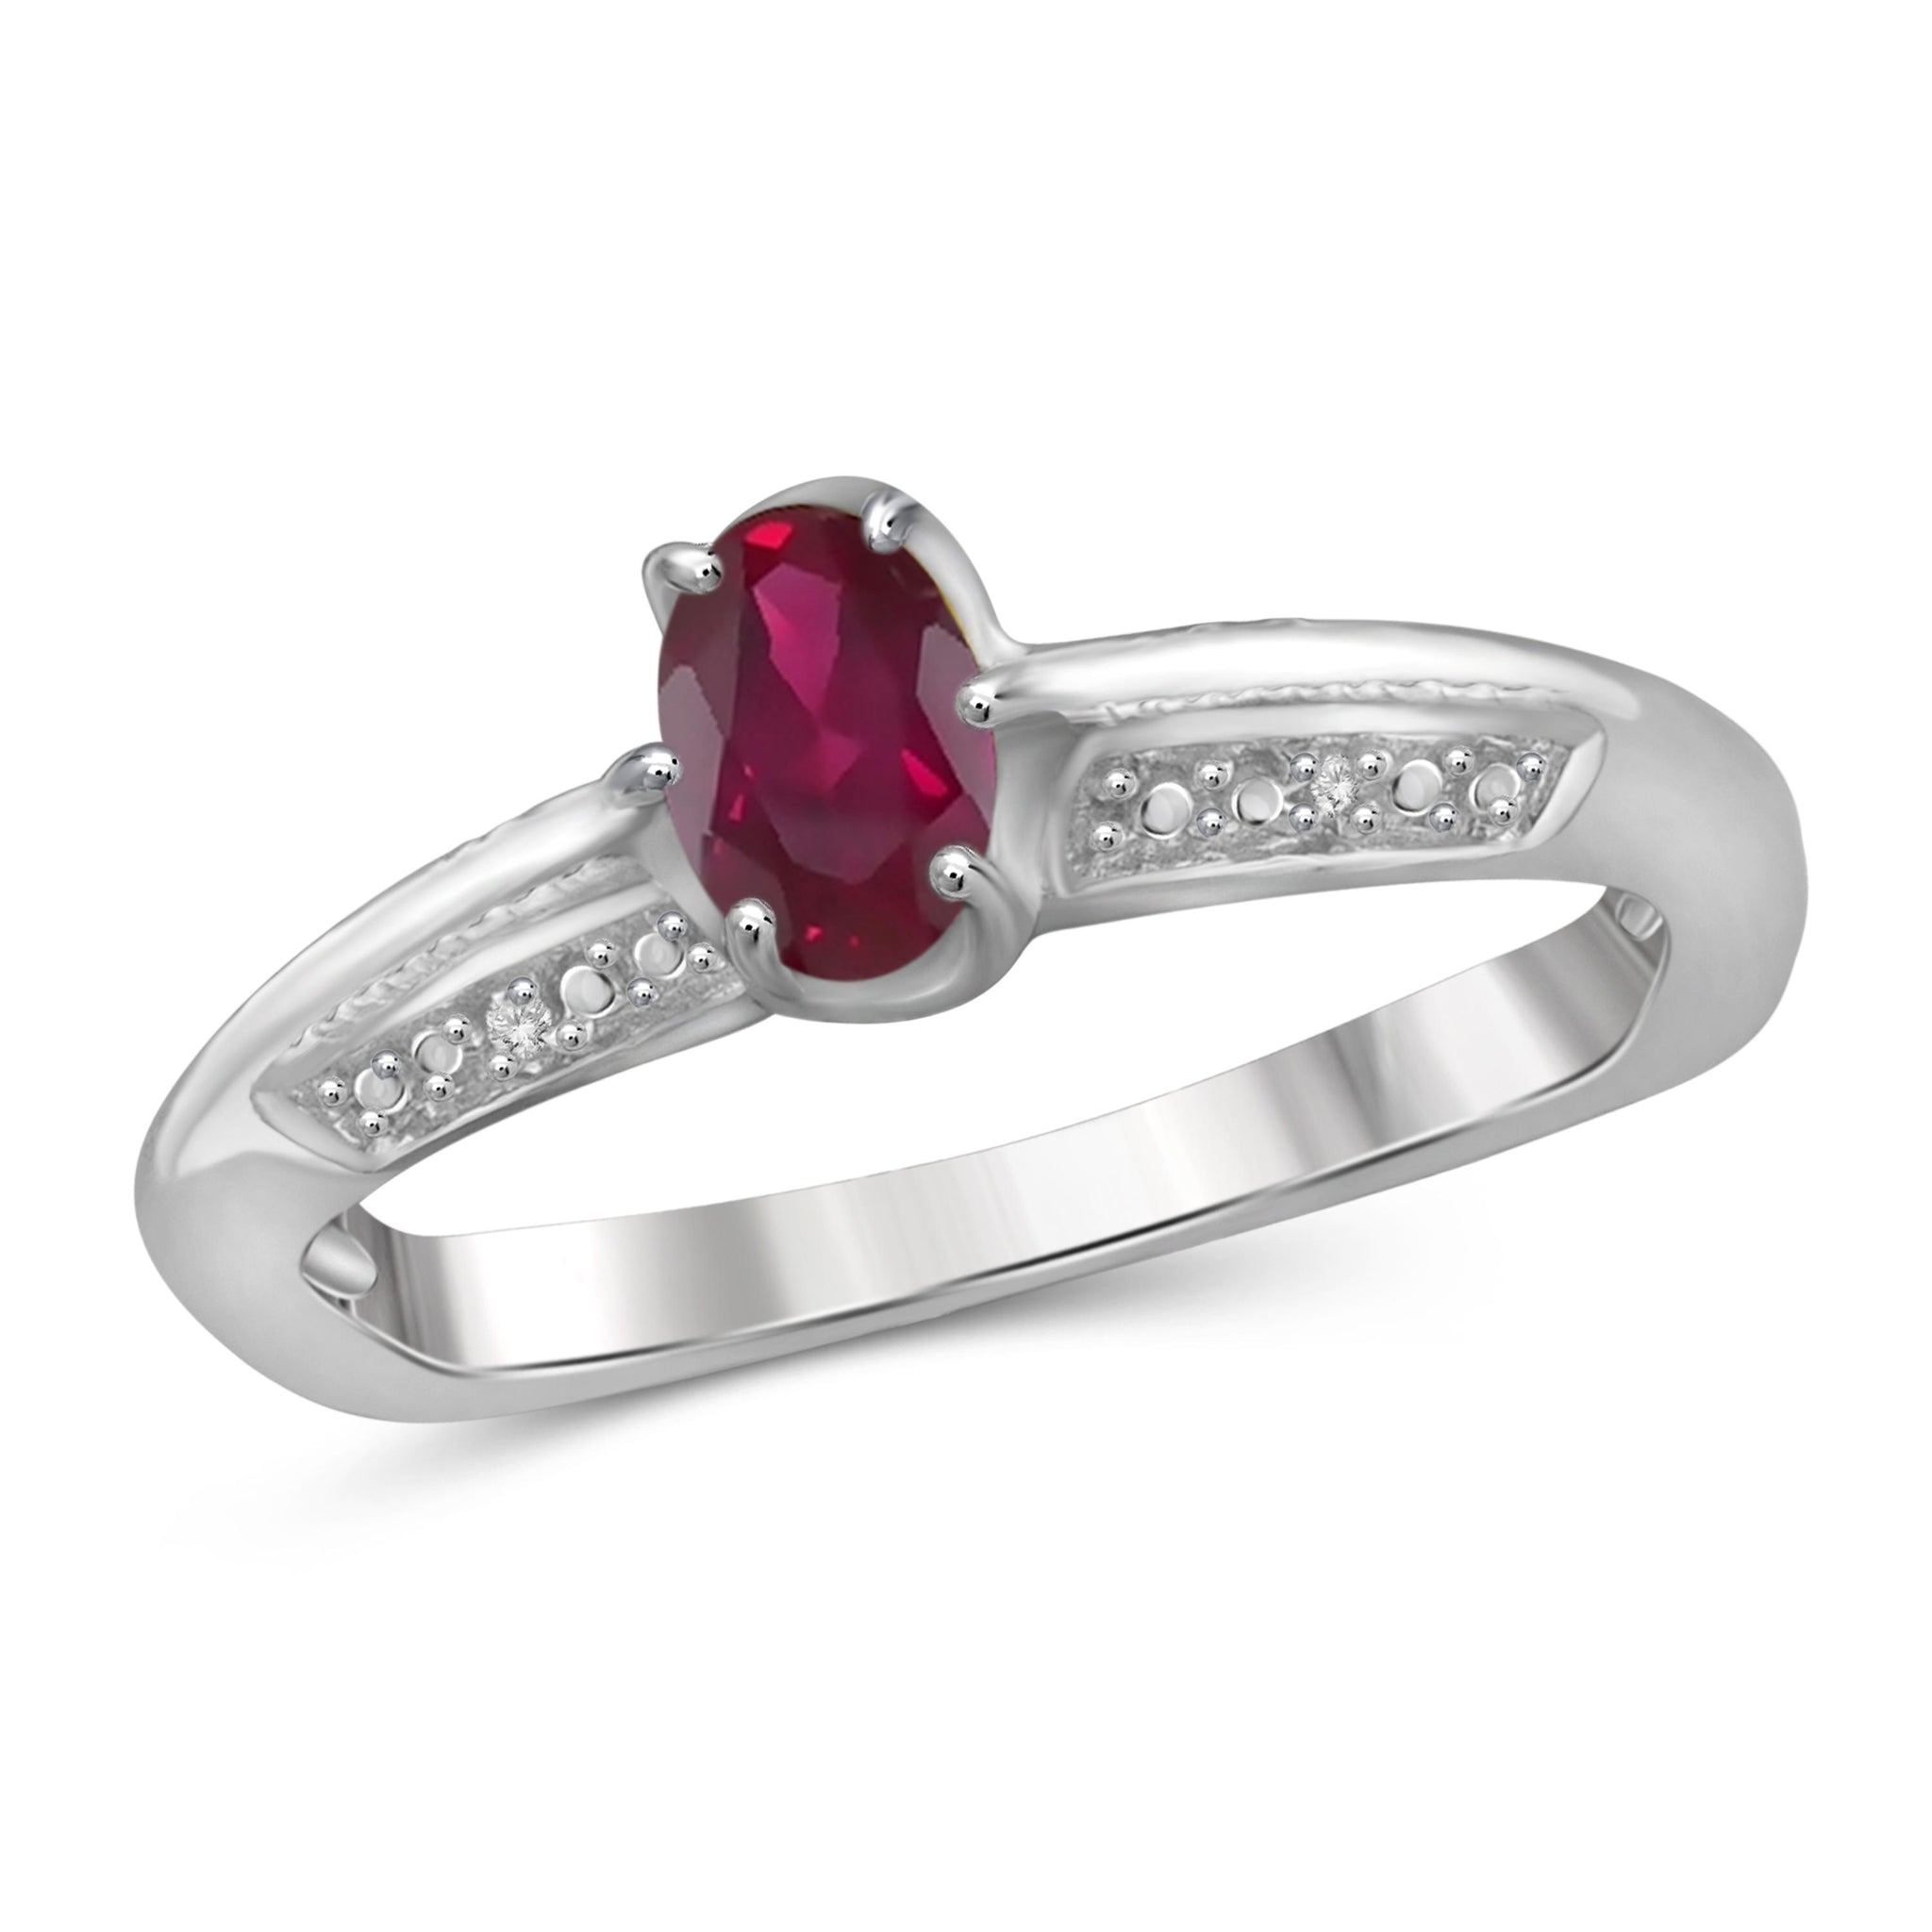 JewelonFire 0.45 Carat T.G.W. Ruby and White Diamond Accent Sterling Silver Ring - Assorted Colors